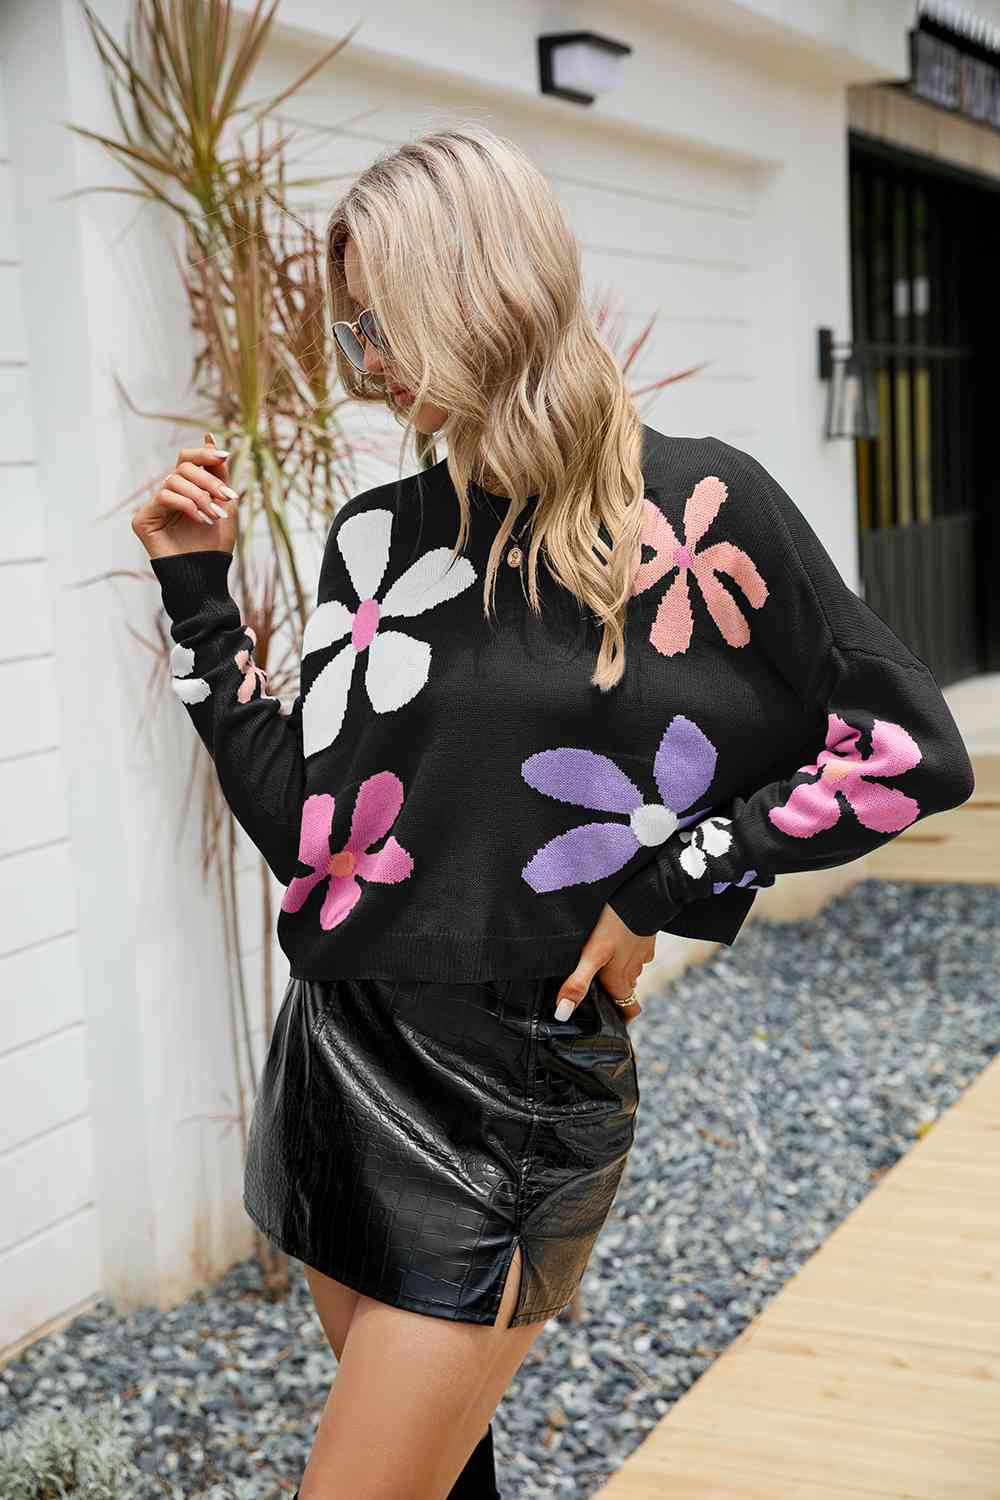 Flower Round Neck Drop Shoulder Sweater free shipping -Oh Em Gee Boutique